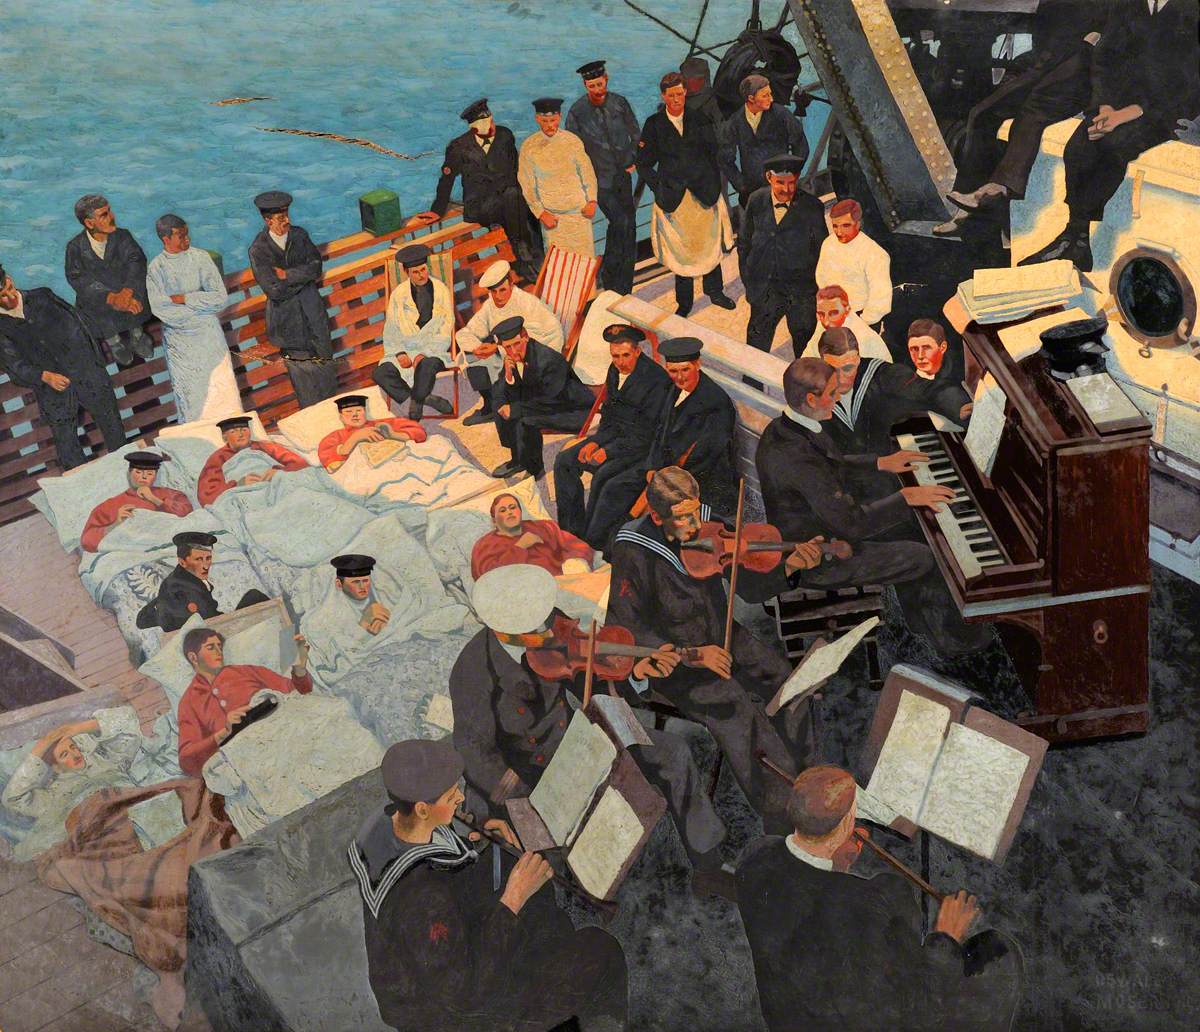 First World War: Wounded Sailors Listening to Musicians Playing on Board a Ship